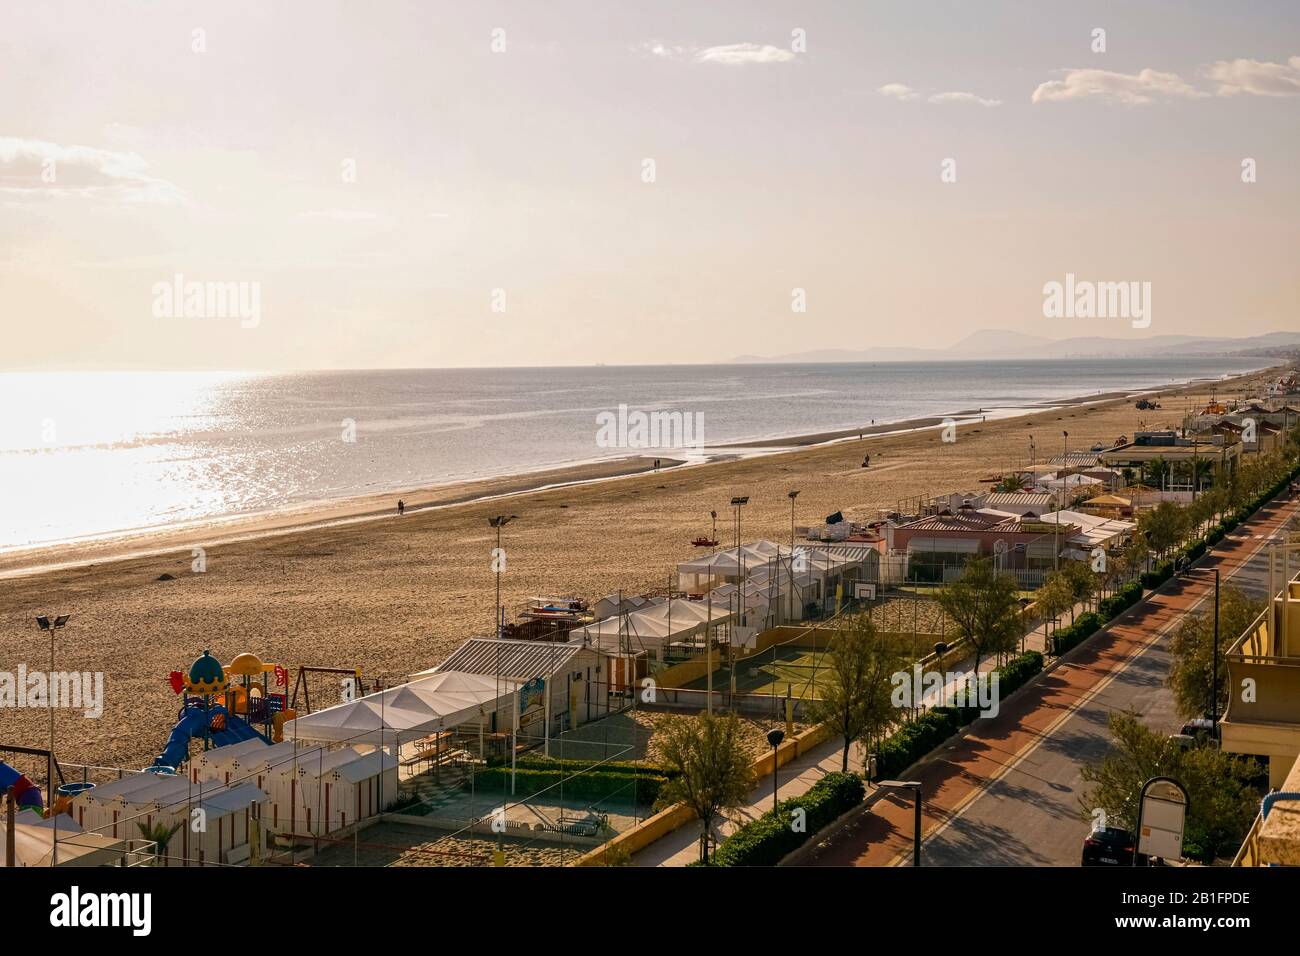 Senigallia Beach High Resolution Stock Photography and Images - Alamy